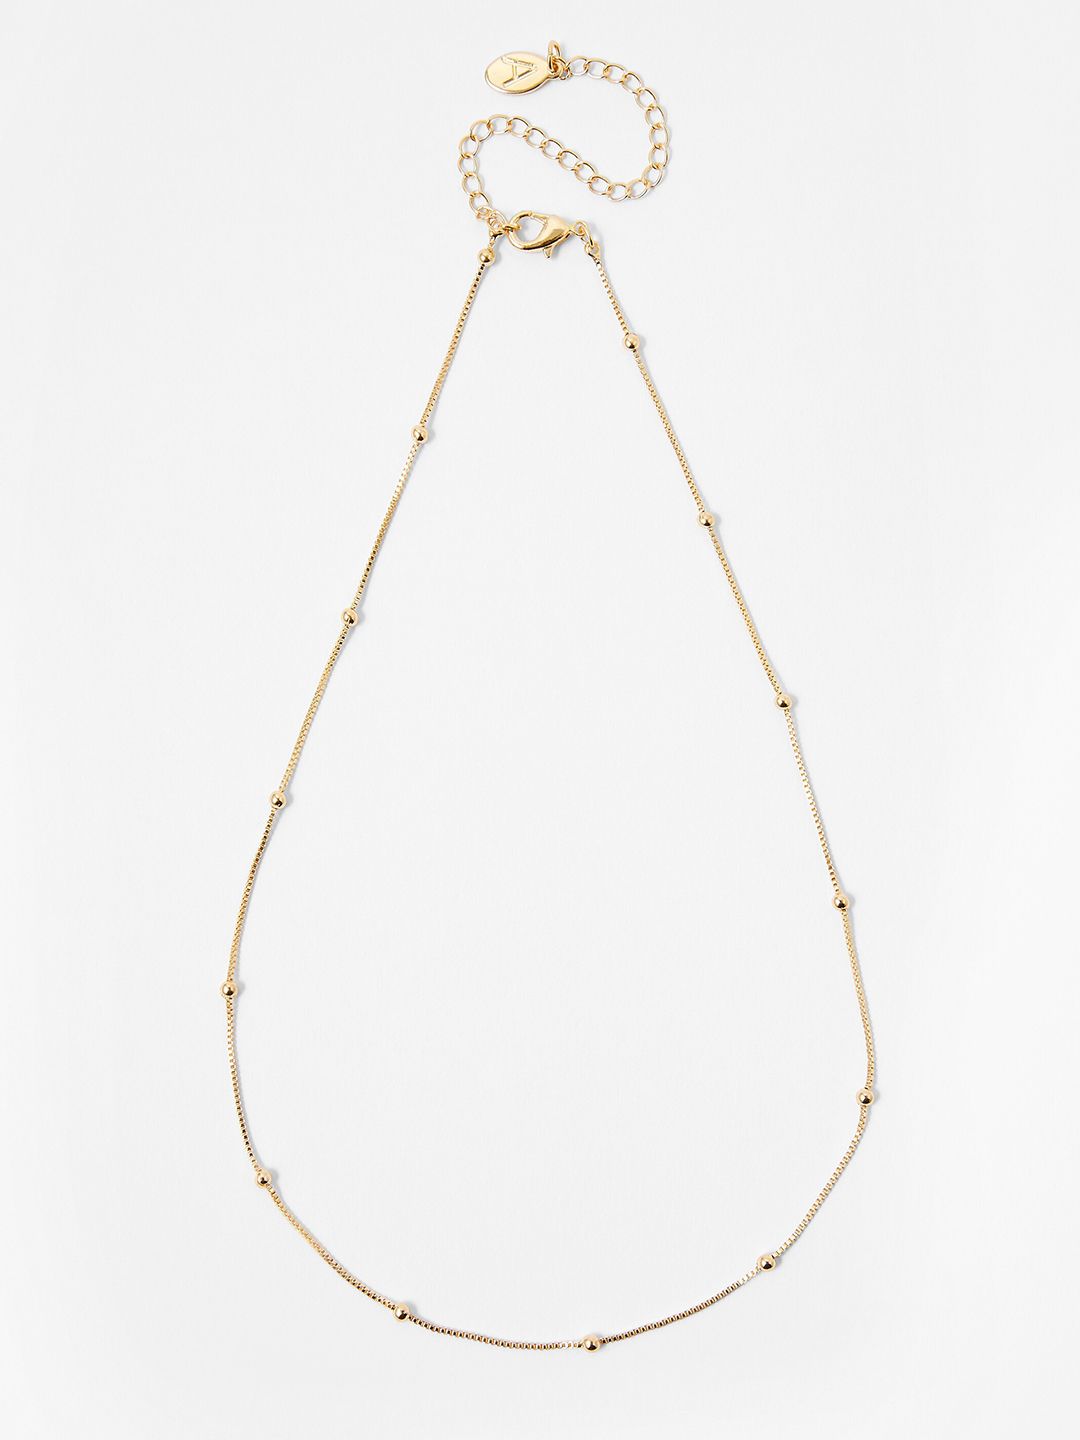 Accessorize Gold-Toned Metal Gold-Plated Chain Price in India